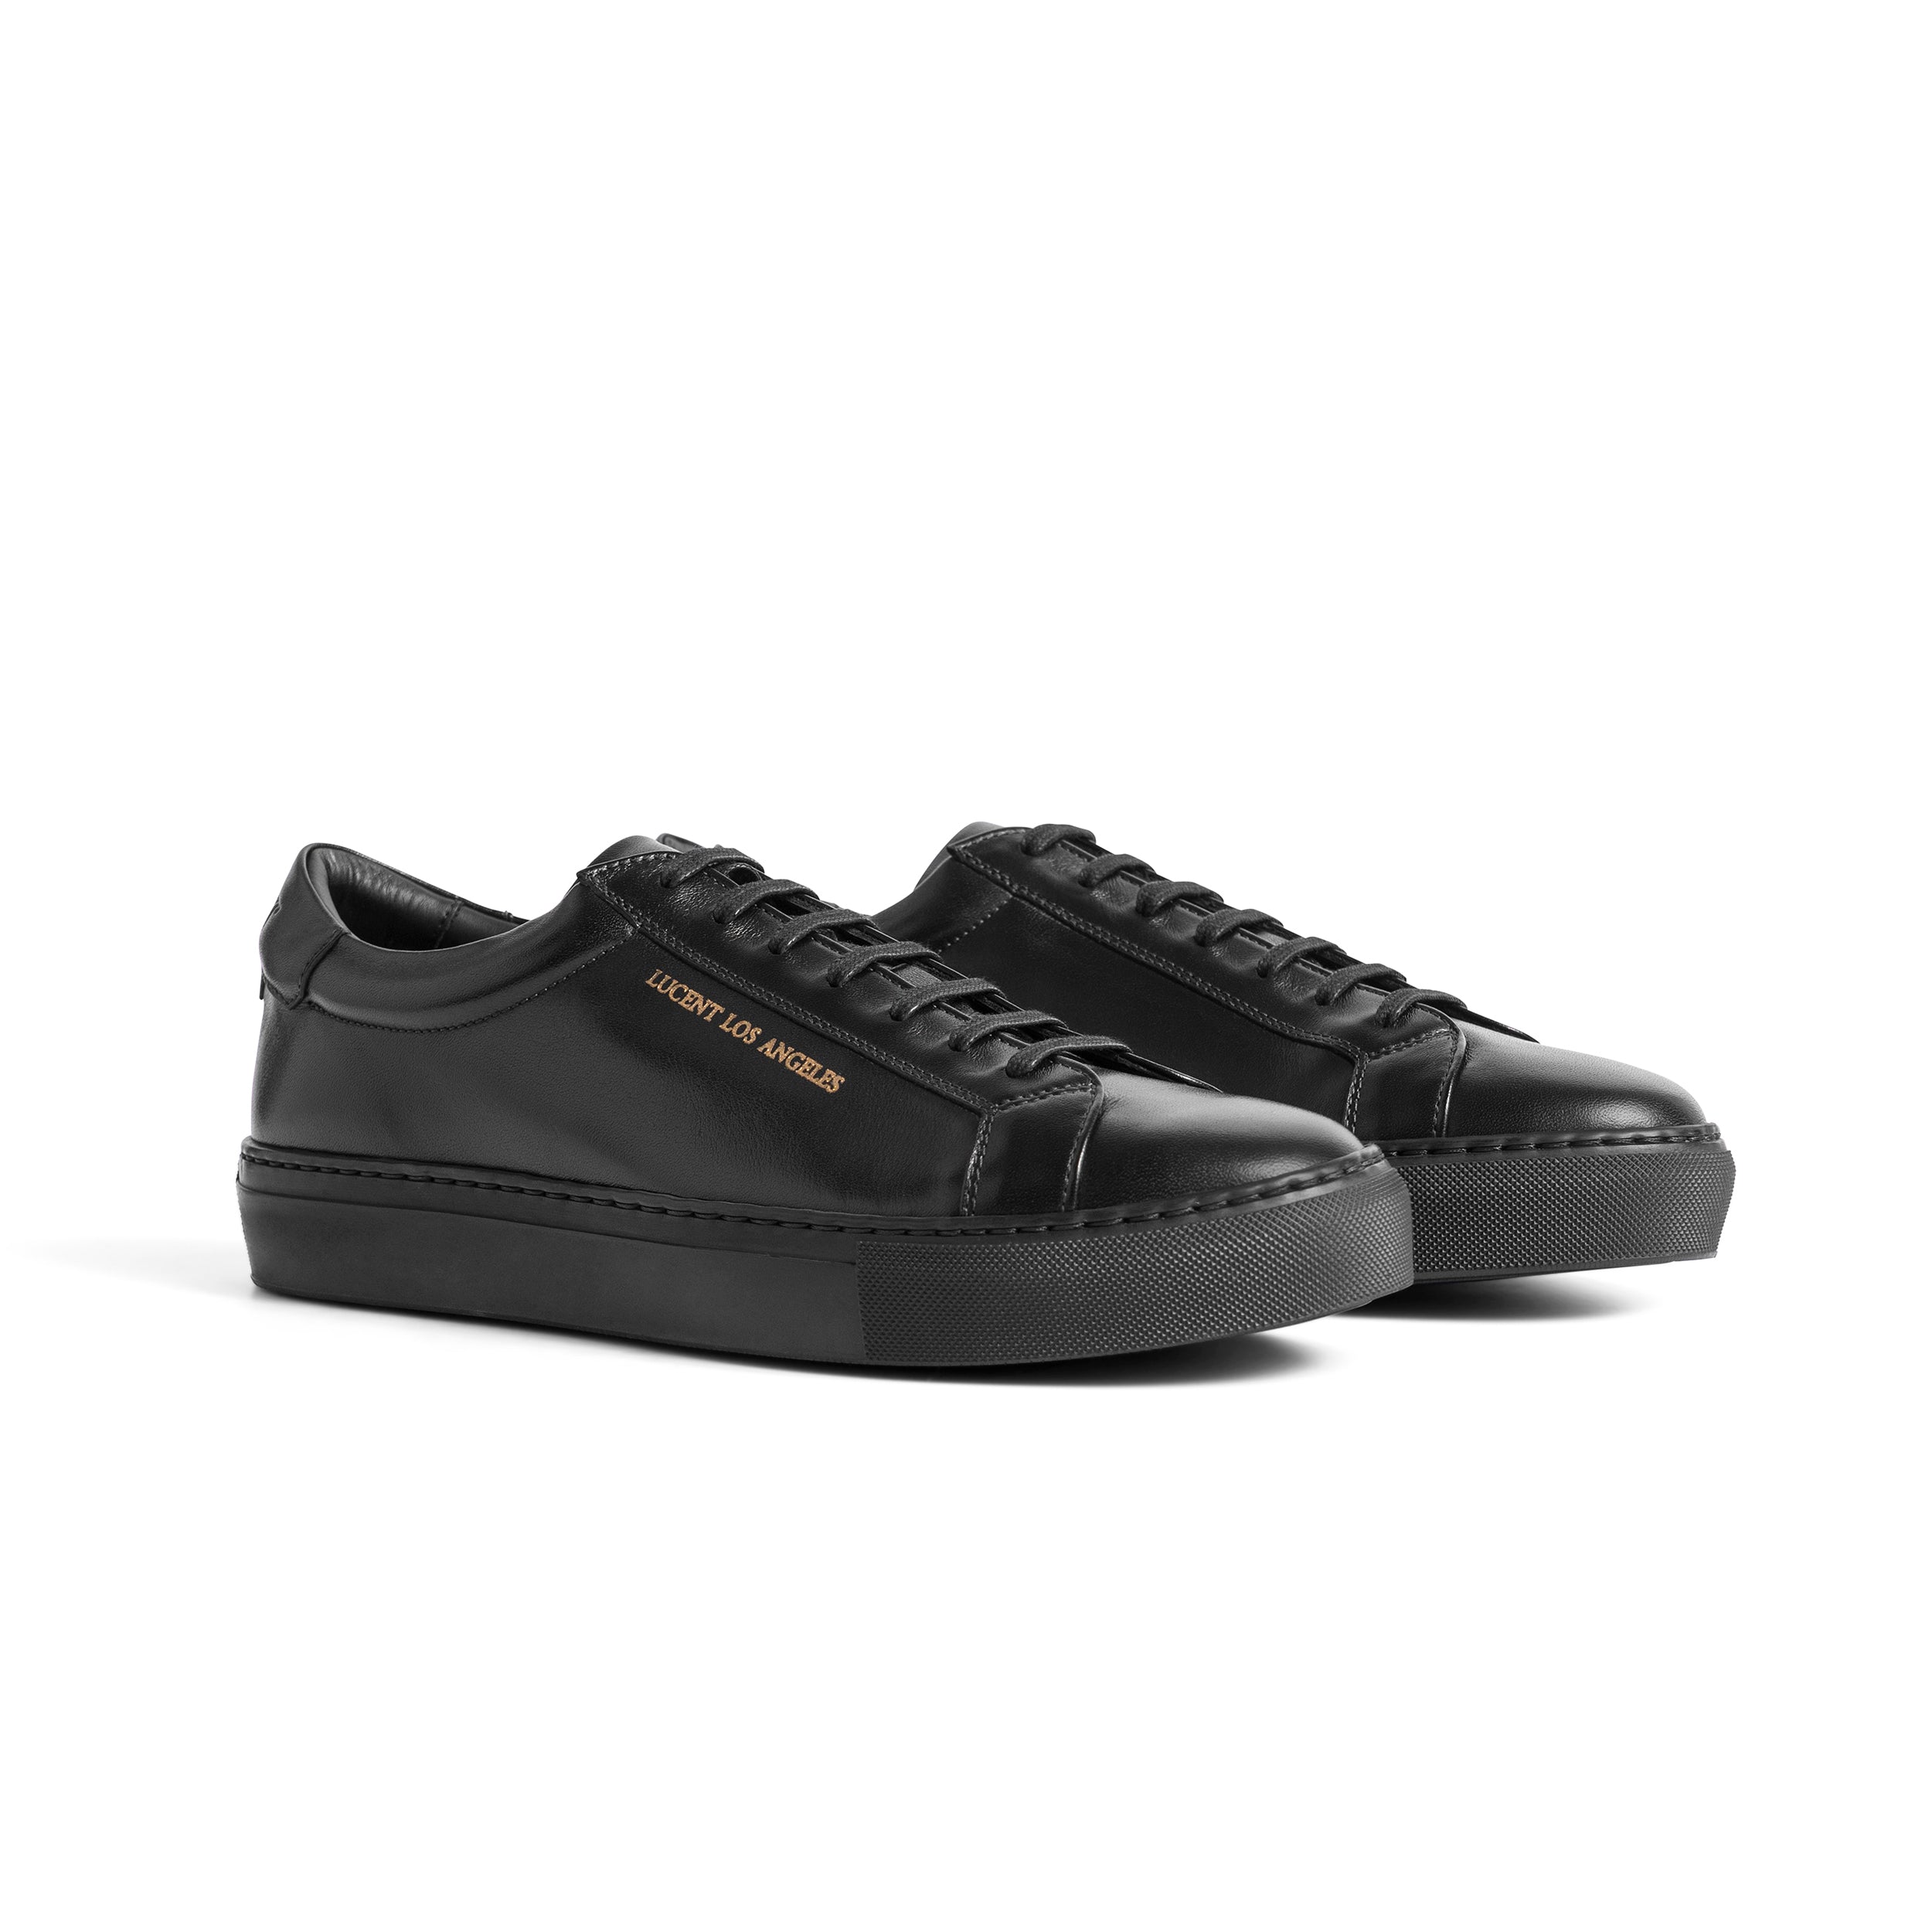 THE LUCENT SNEAKER (BLACK)